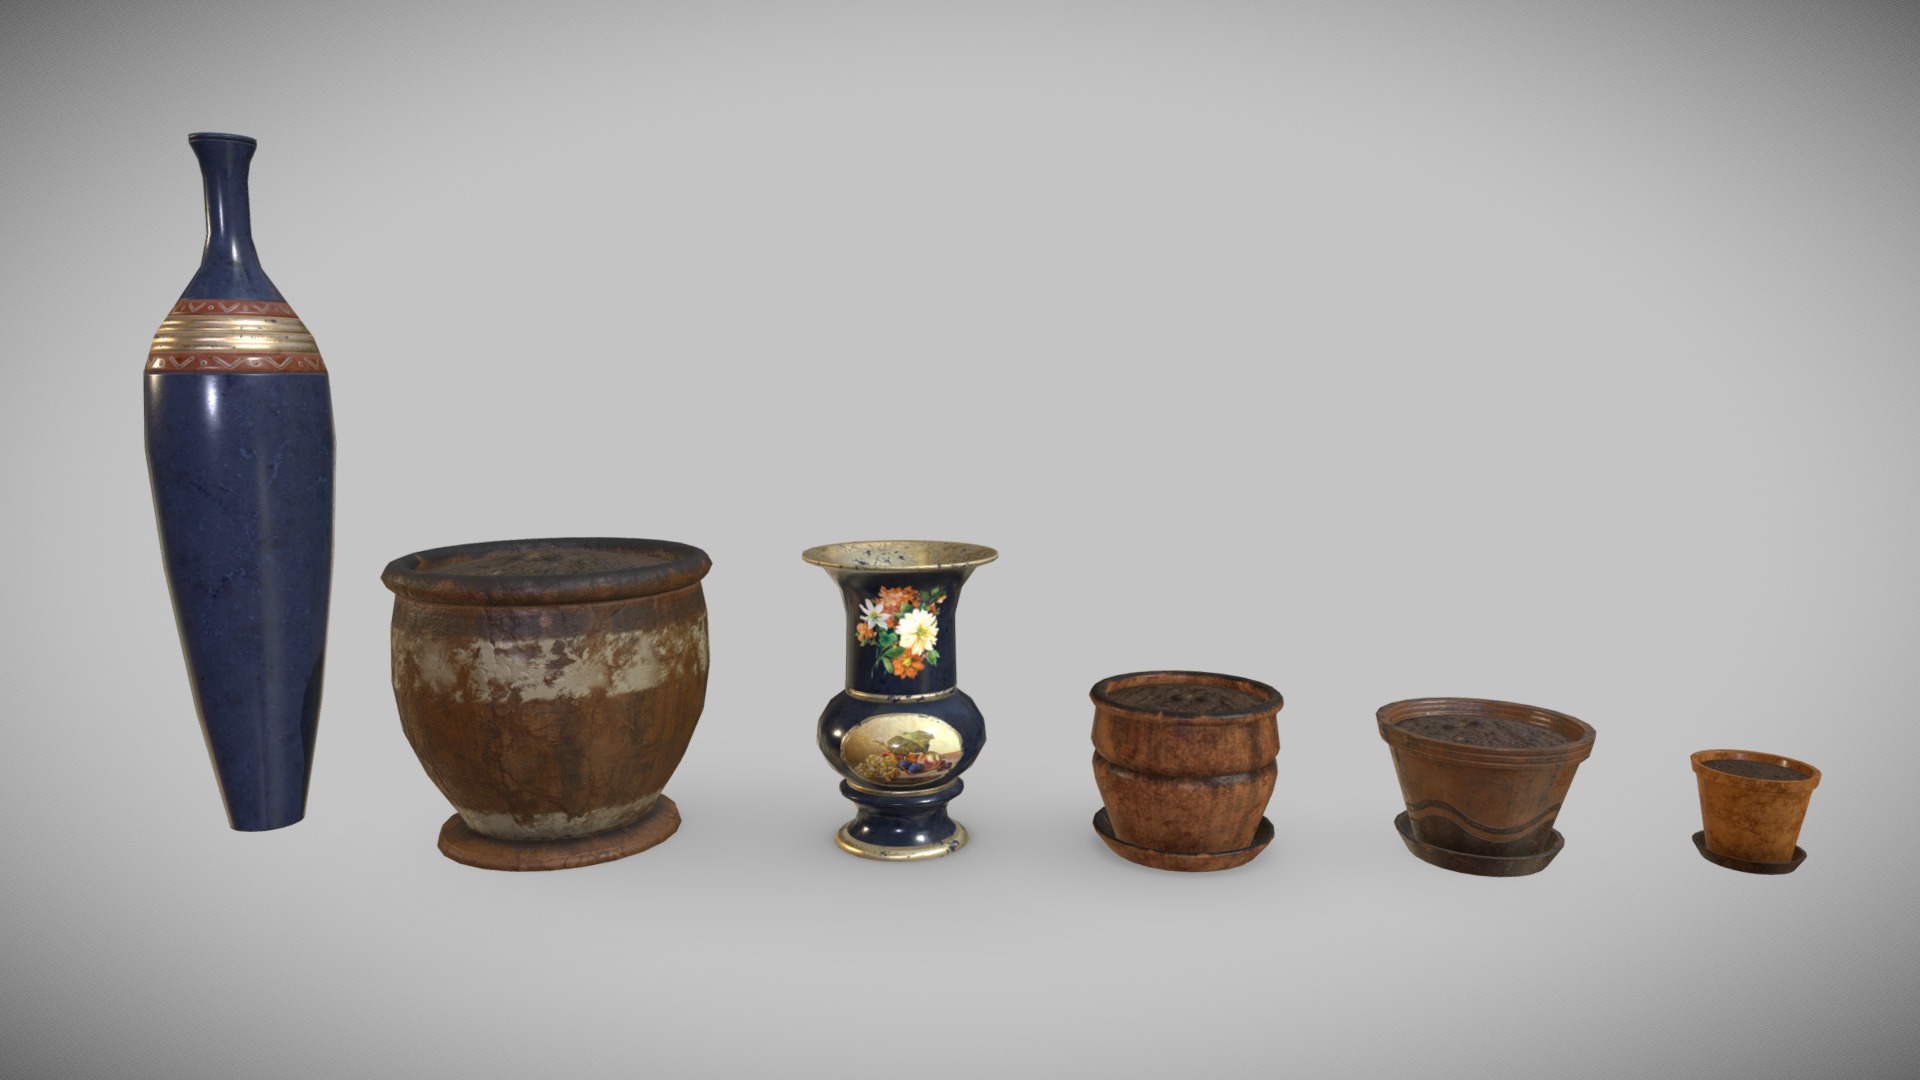 3D model Flower Pots - This is a 3D model of the Flower Pots. The 3D model is about a group of vases on a white background.